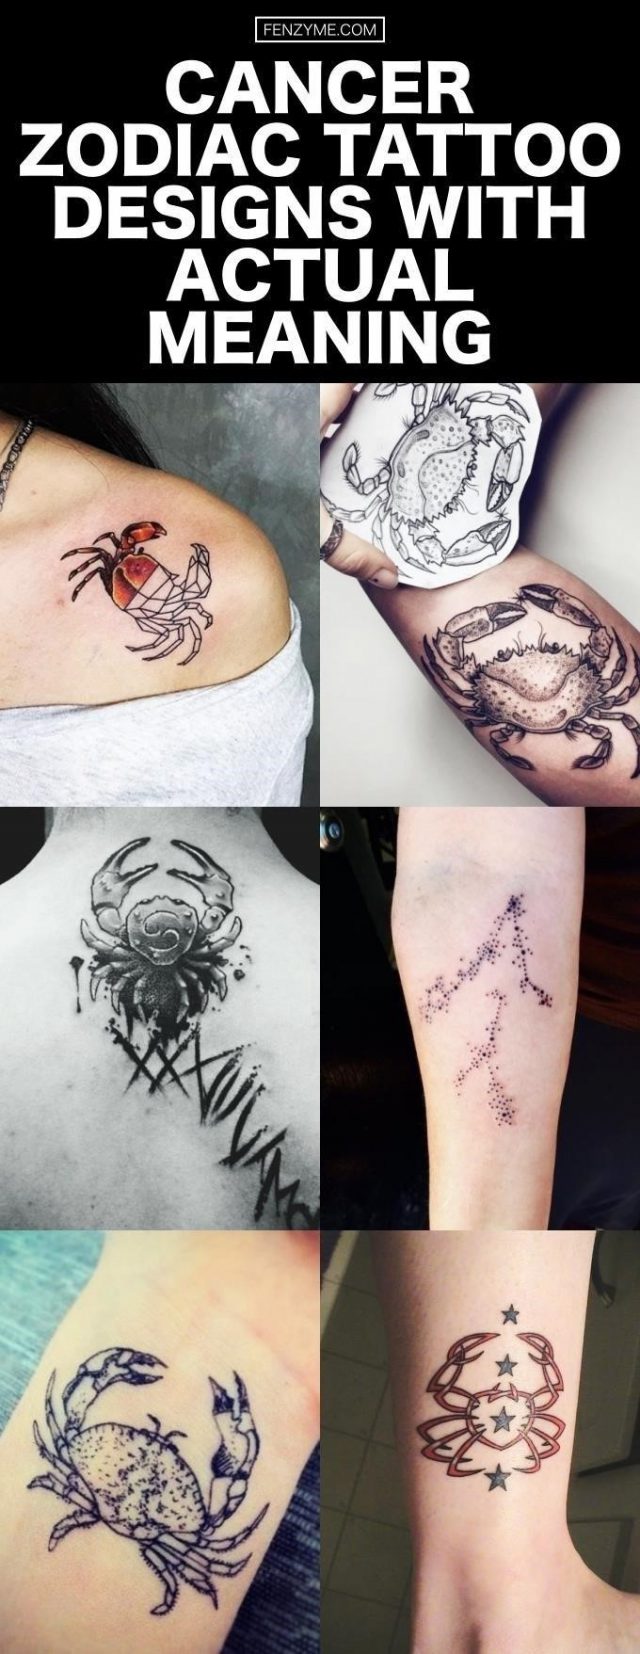 Cancer Zodiac Tattoo Designs With Actual Meaning00000